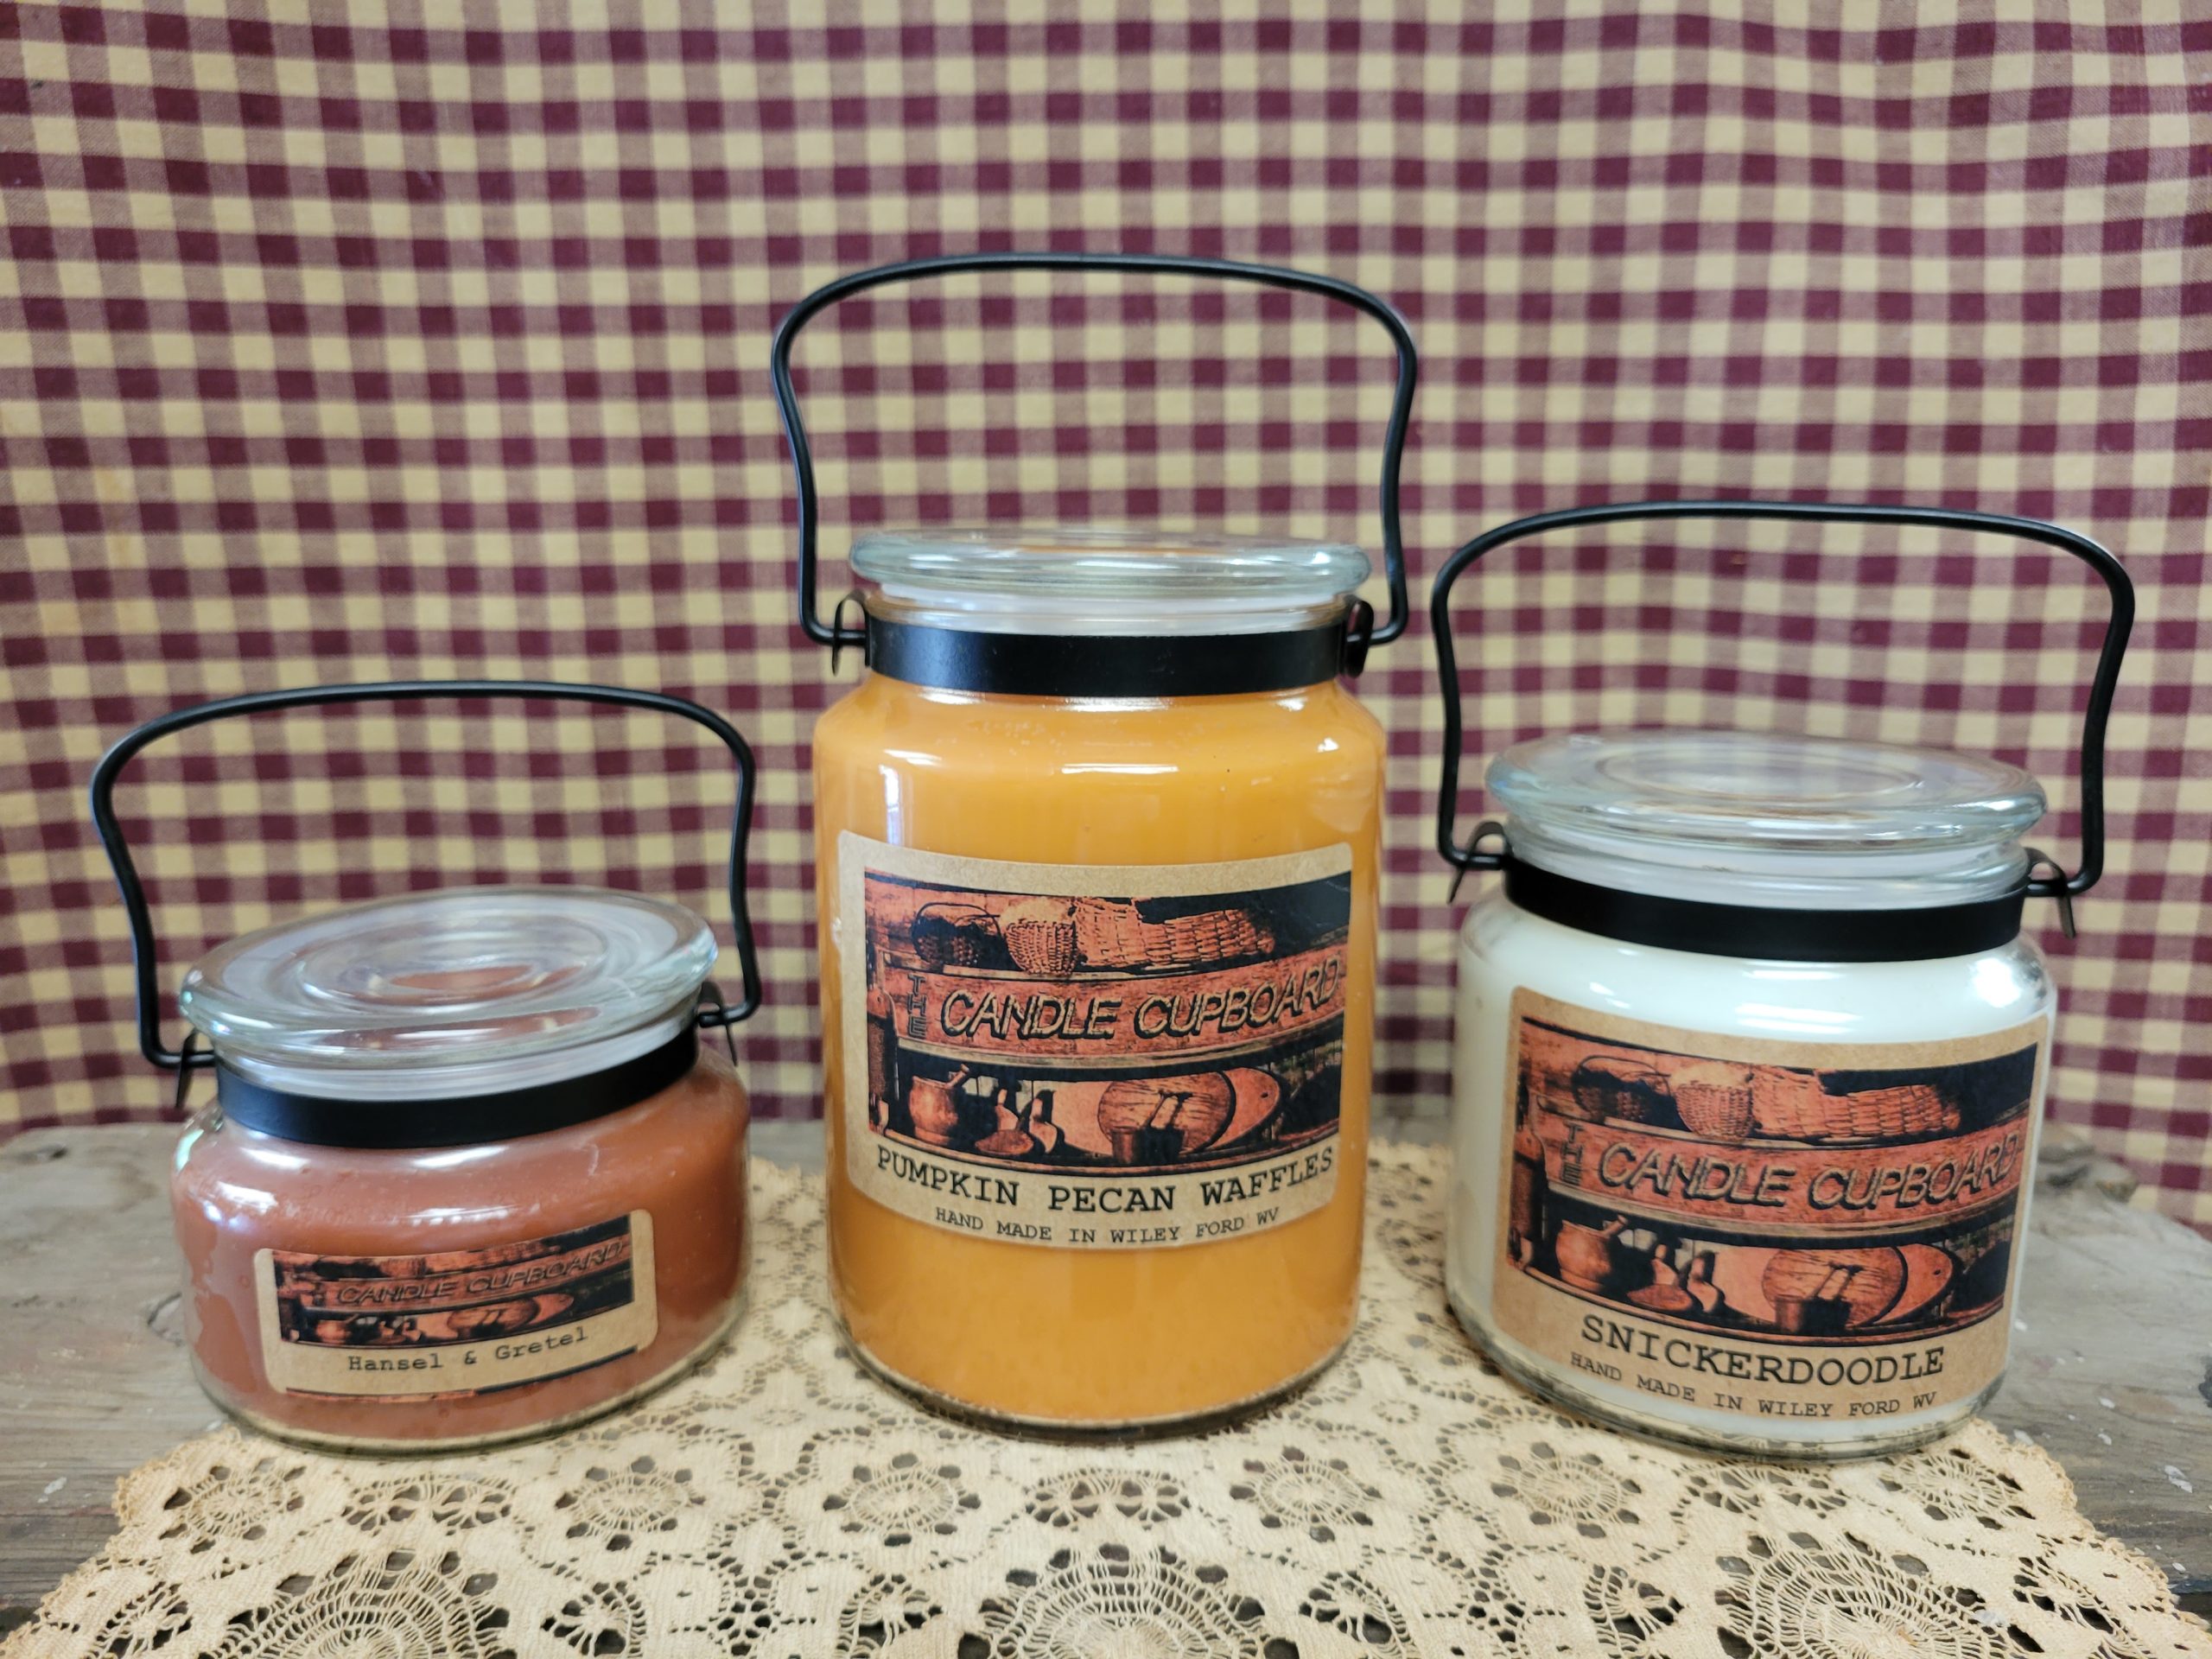 Blueberry Maple | Large 2-Wick Jar (26oz) | Country Candle